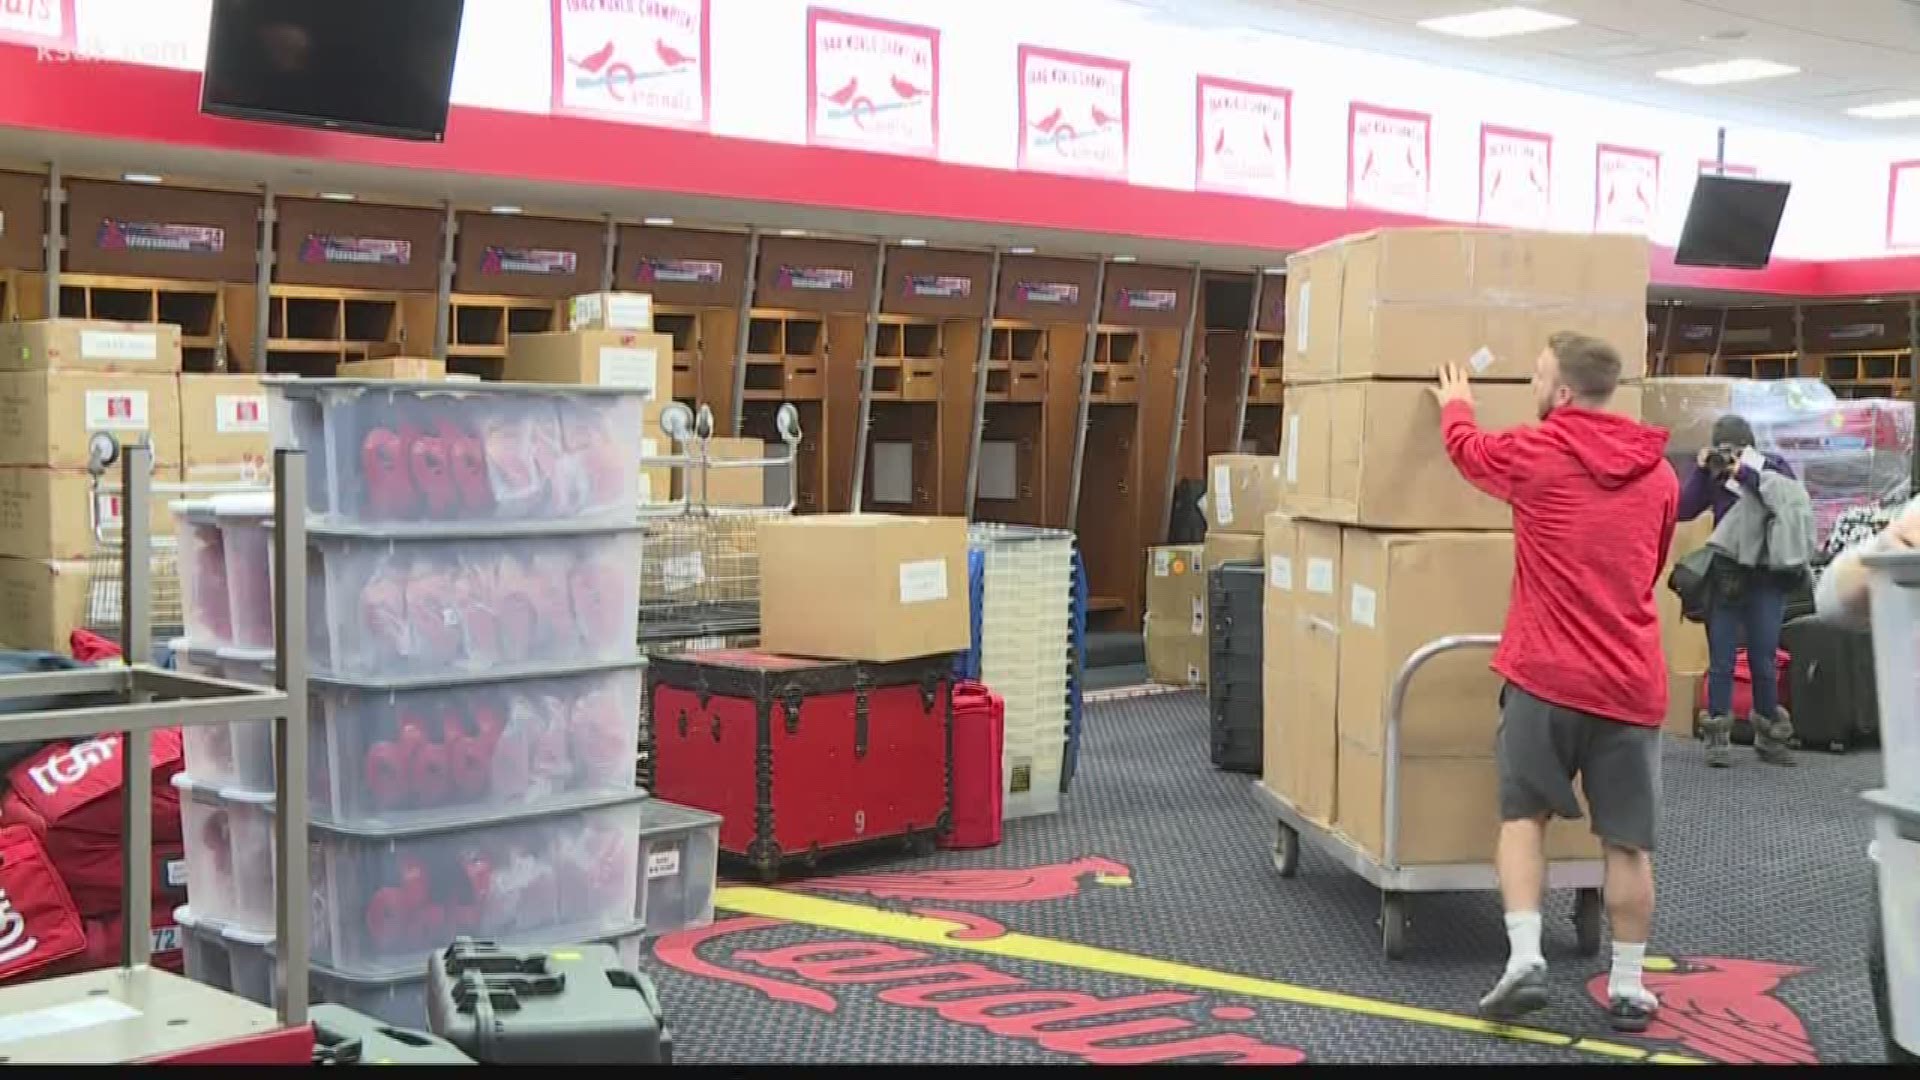 Movers packed up more than 50,000 pounds of baseball and medical equipment for the trip down to Jupiter, Florida.